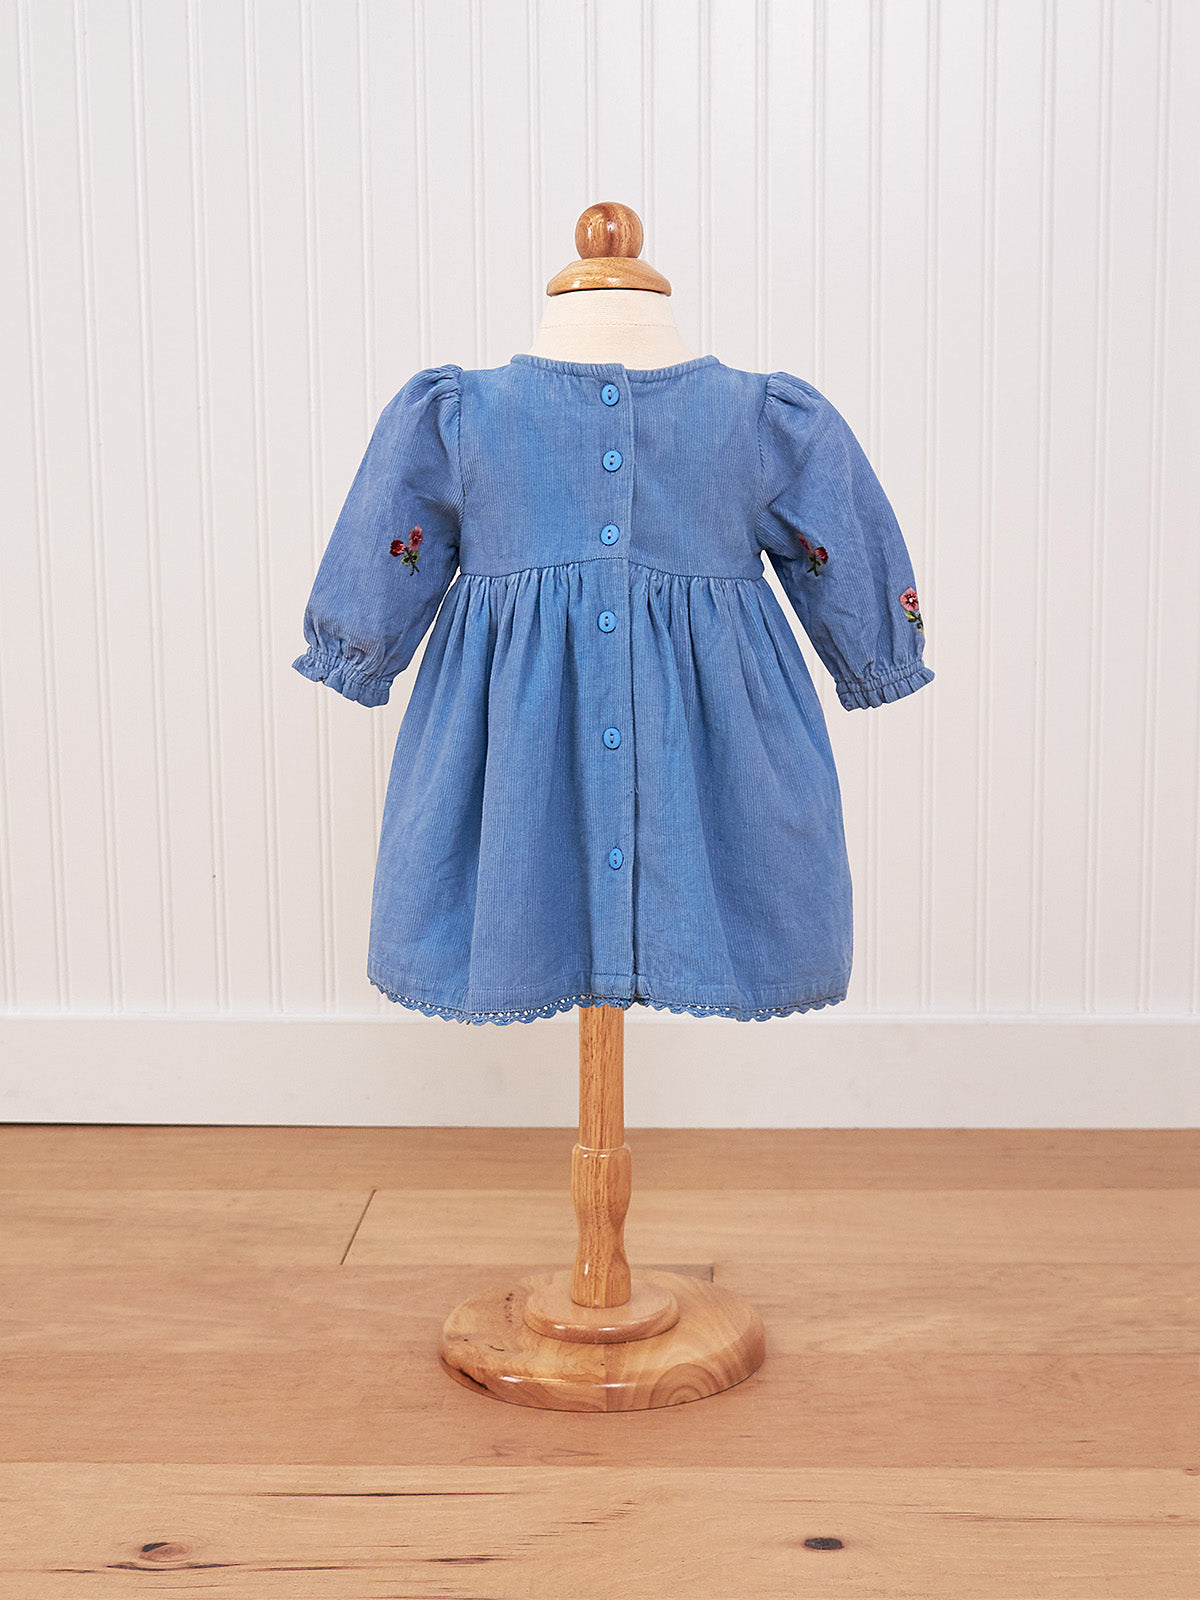 April Cornell Cotton Fiona Baby Dress - Embroidered Corduroy – Twang & Pearl